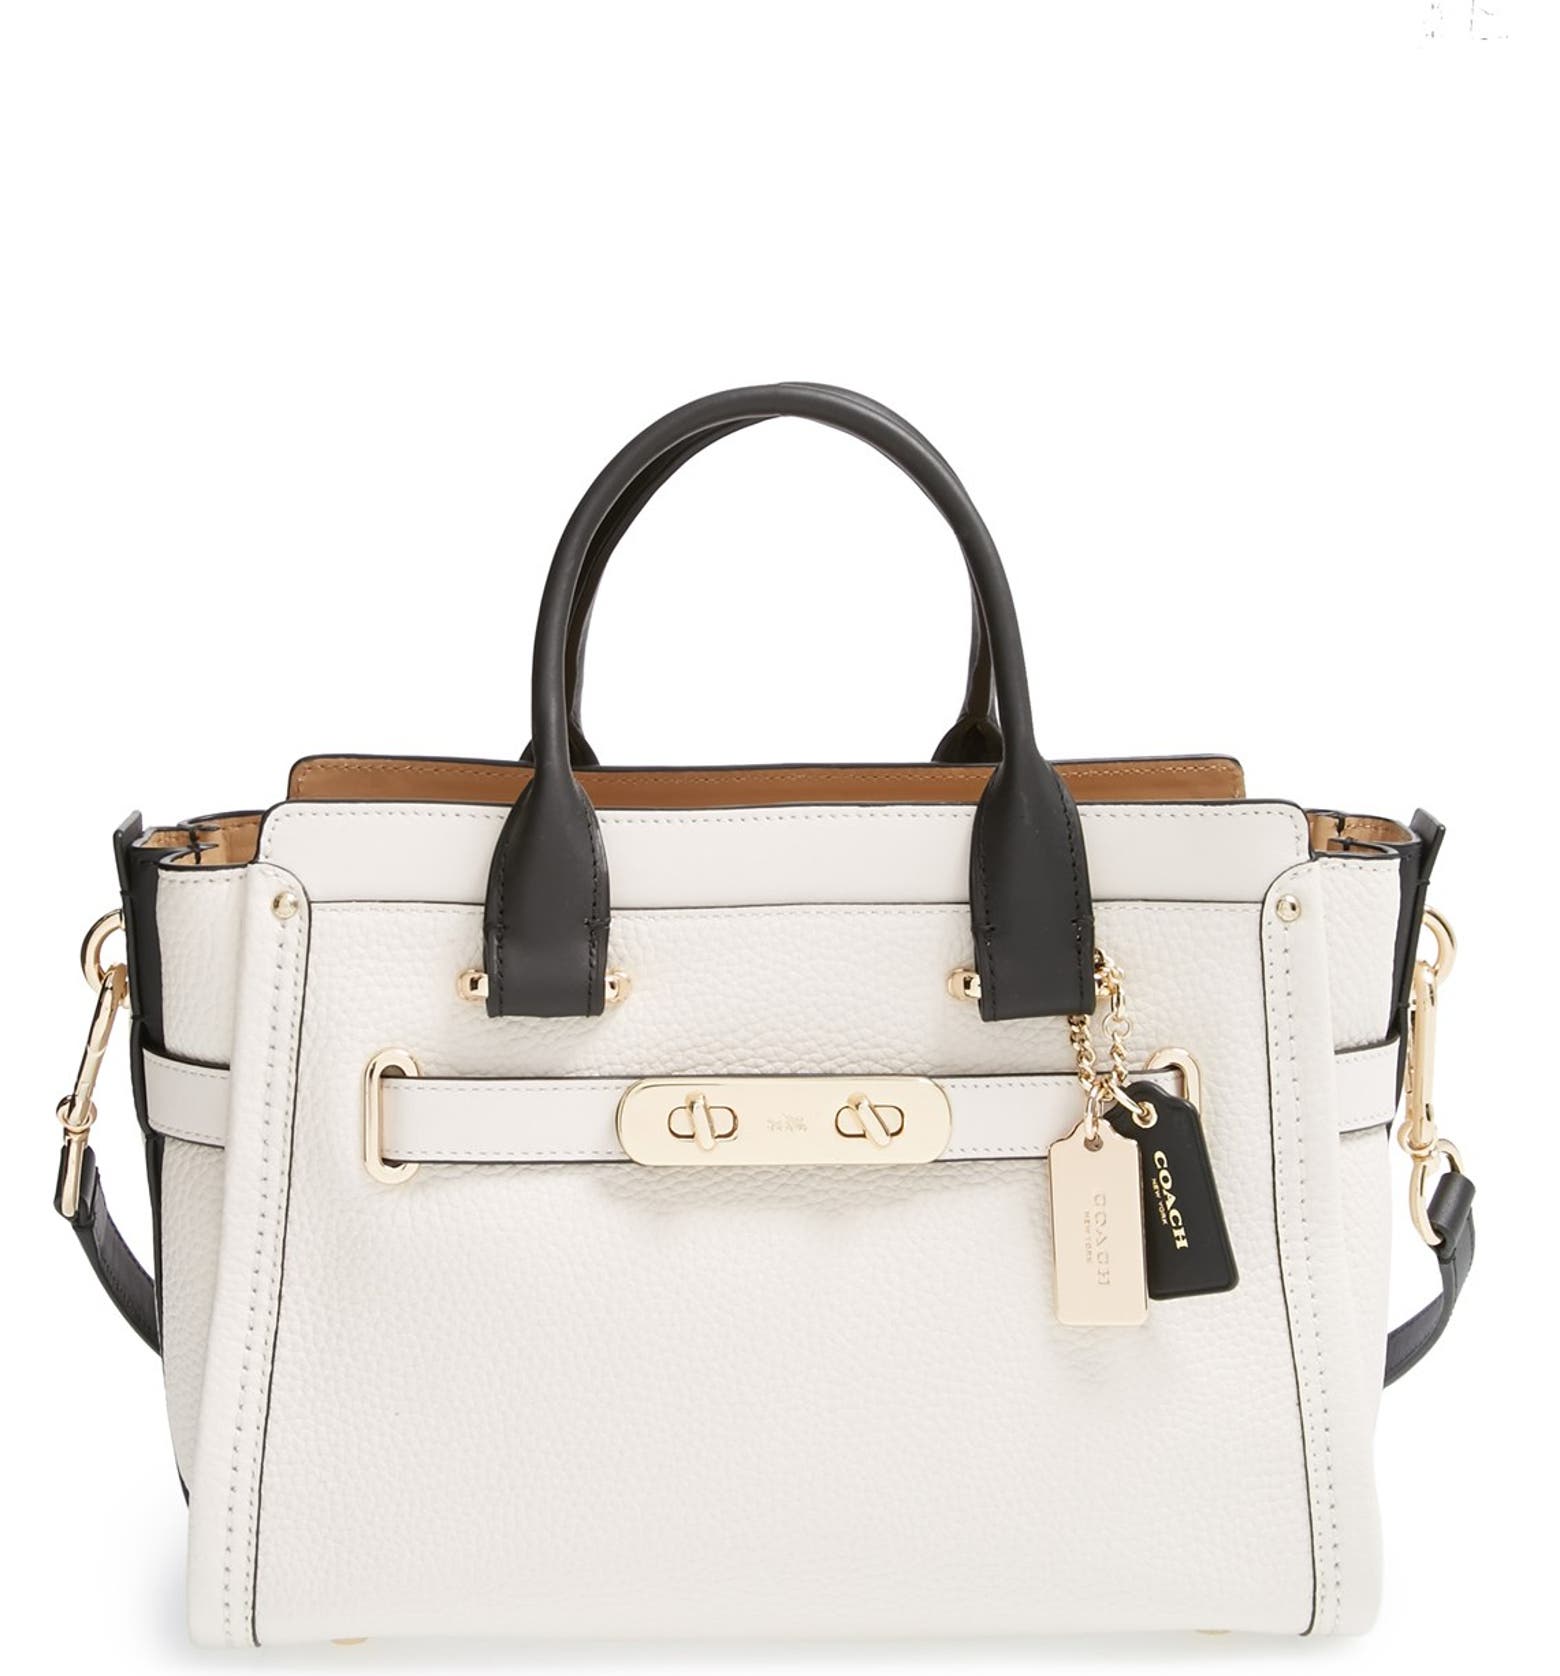 COACH 'Swagger 35' Colorblock Leather Satchel | Nordstrom